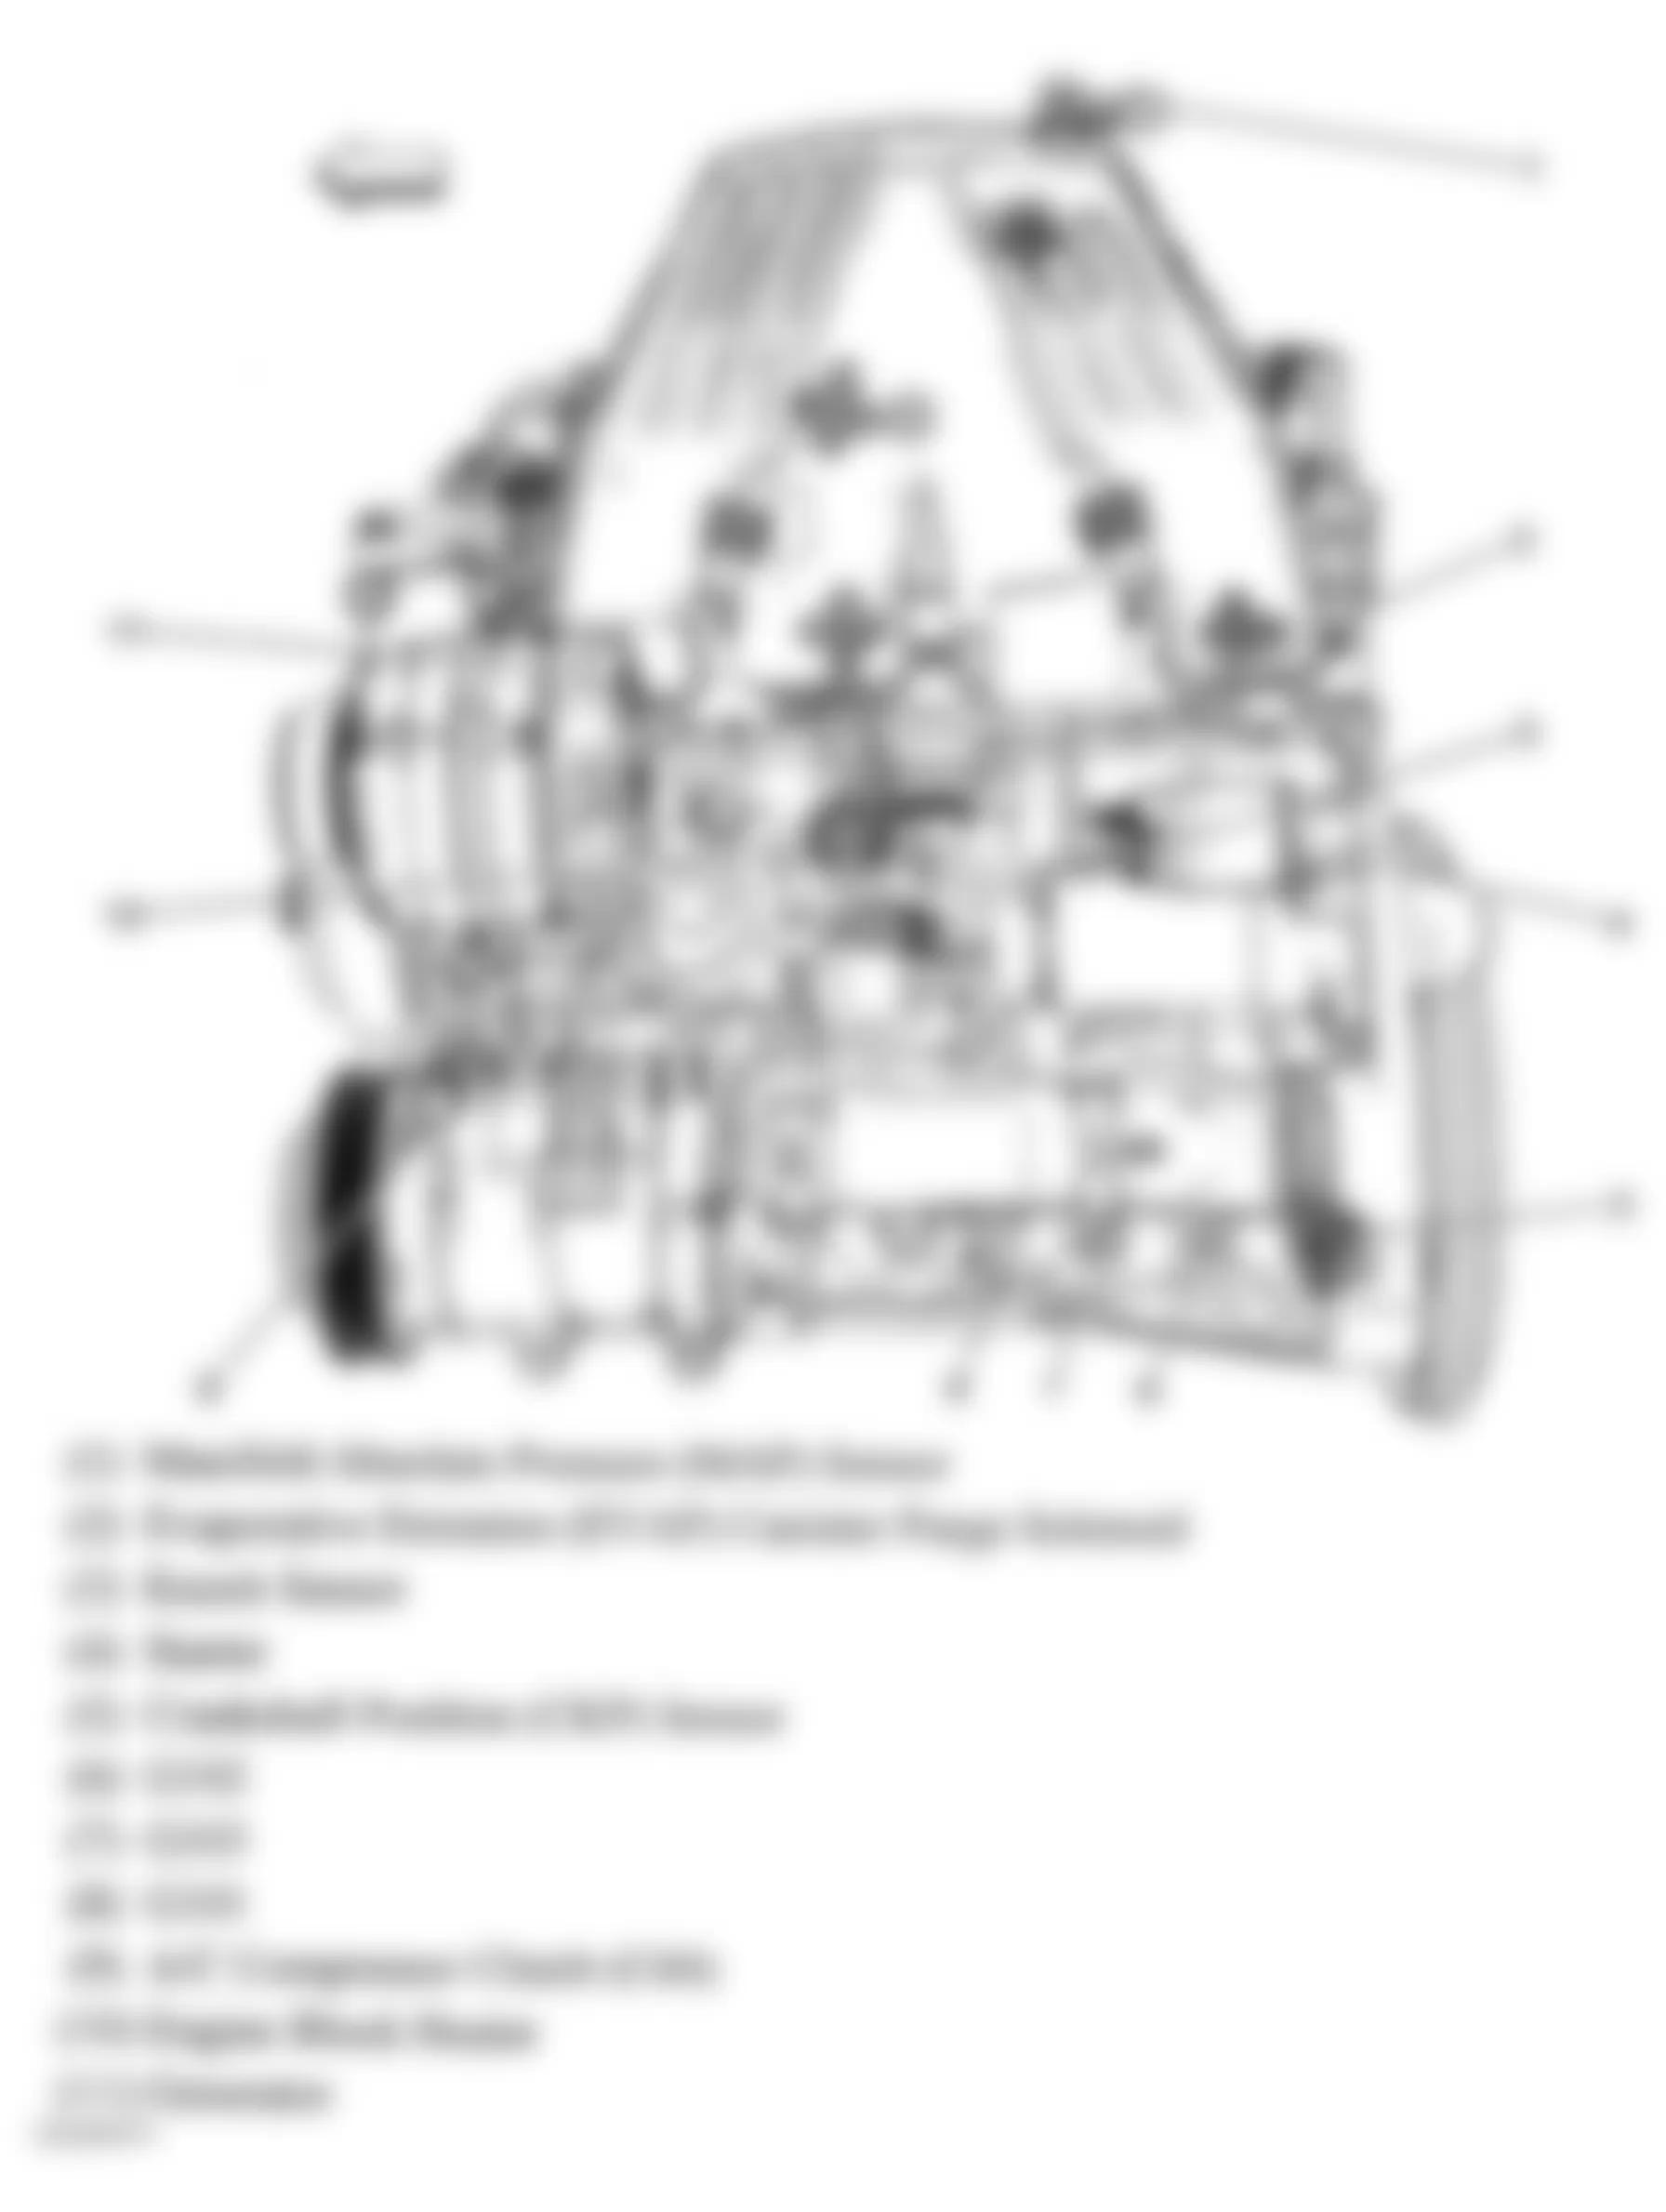 Chevrolet Colorado 2010 - Component Locations -  Left Side Of Engine (2.9L)